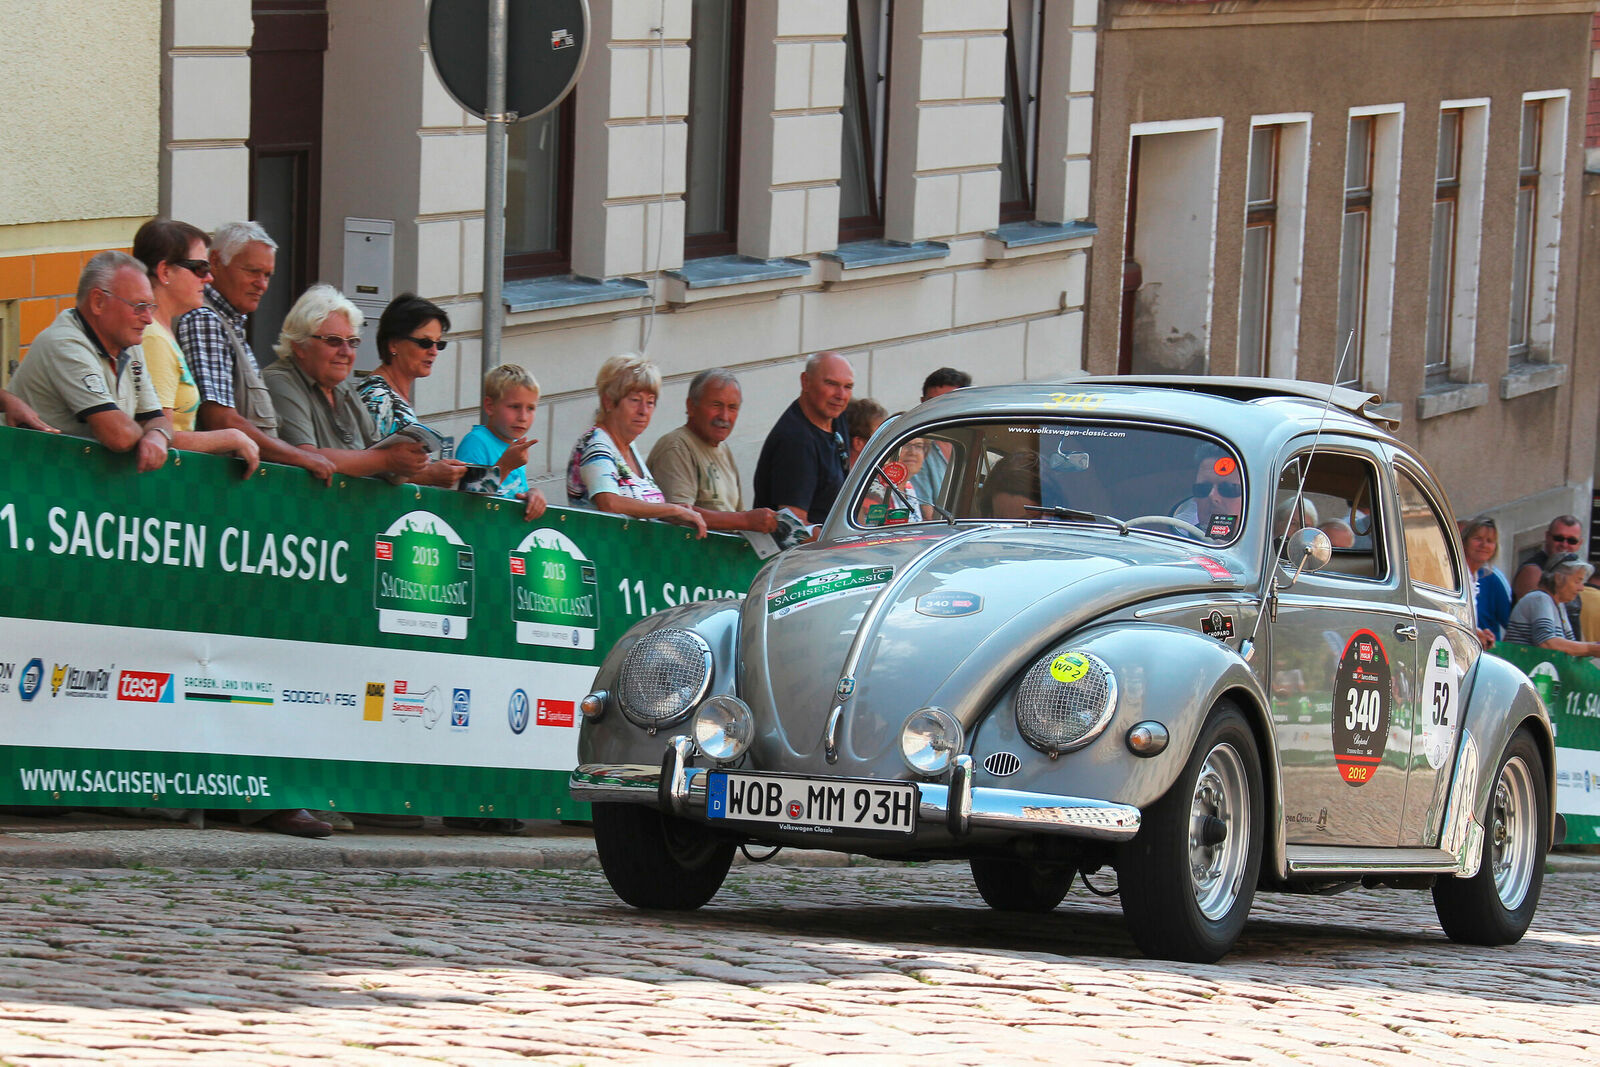 Making a repeat appearance in the 2018 Sachsen Classic: ‘Mille Miglia’ Oval Beetle (1956).